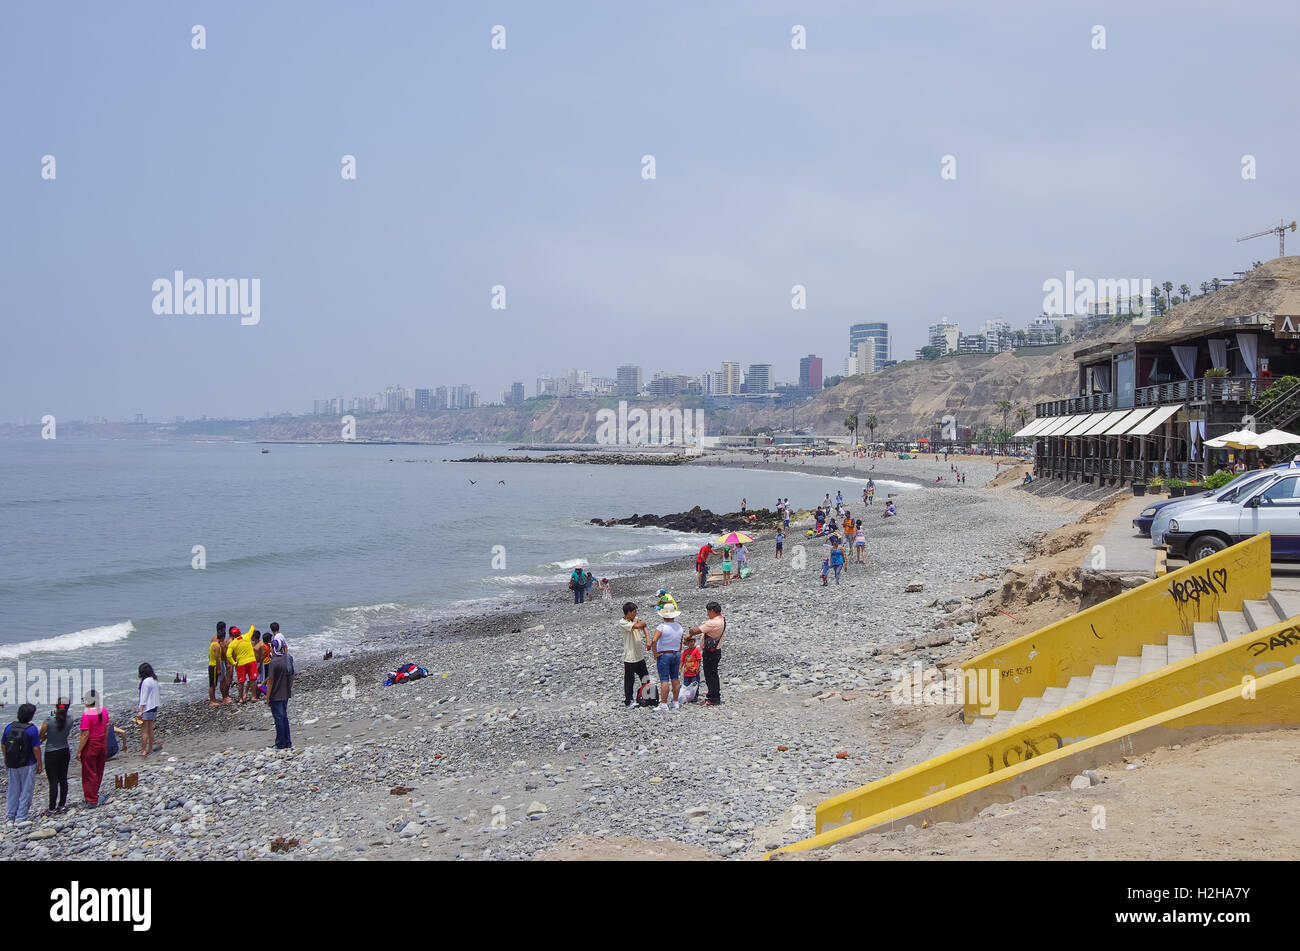 Lima, Peru - January 1, 2014: People on the public city ocean beach in Barranco district. Stock Photo